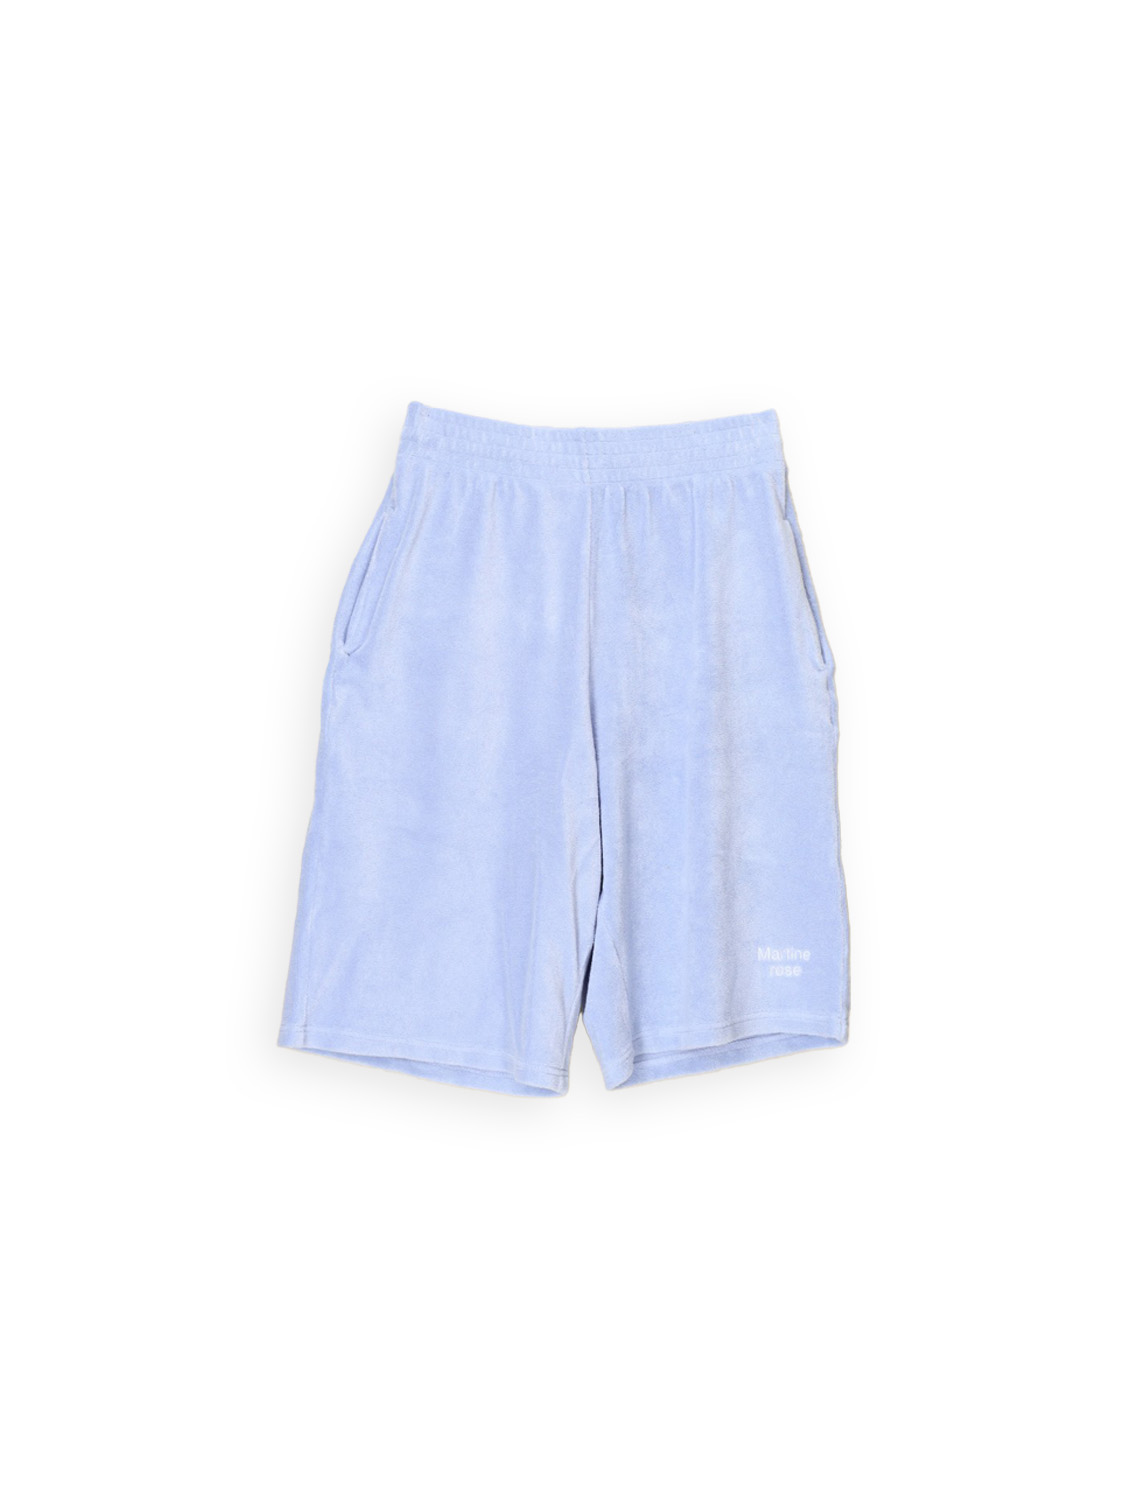 Classic Frottee-Shorts aus Baumwoll-Mix 